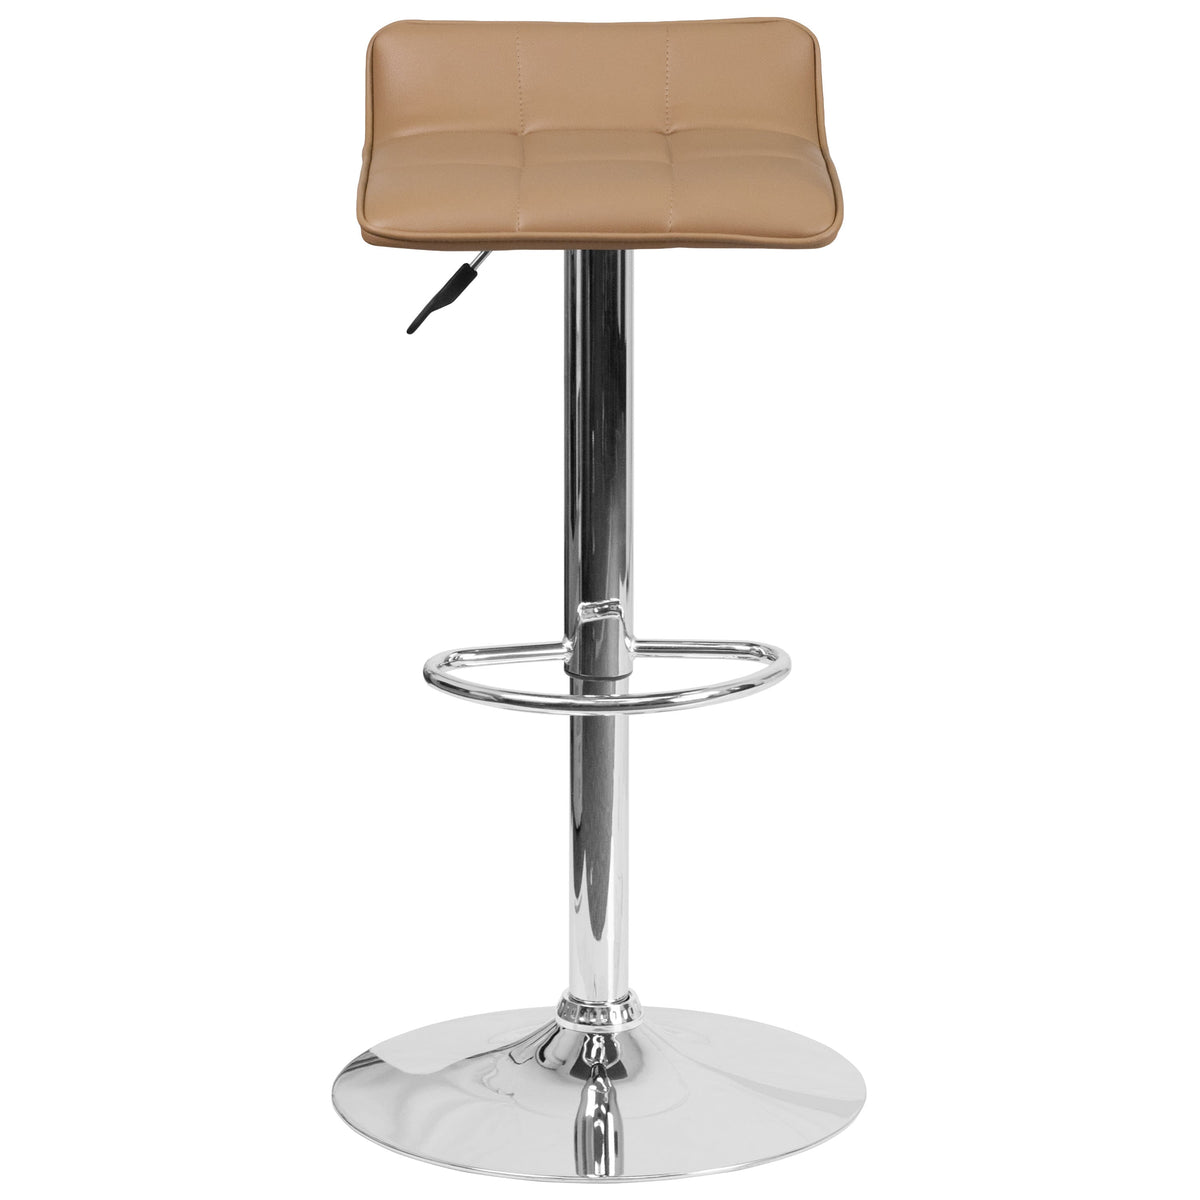 Cappuccino |#| Cappuccino Vinyl Adjustable Height Barstool with Quilted Wave Seat & Chrome Base